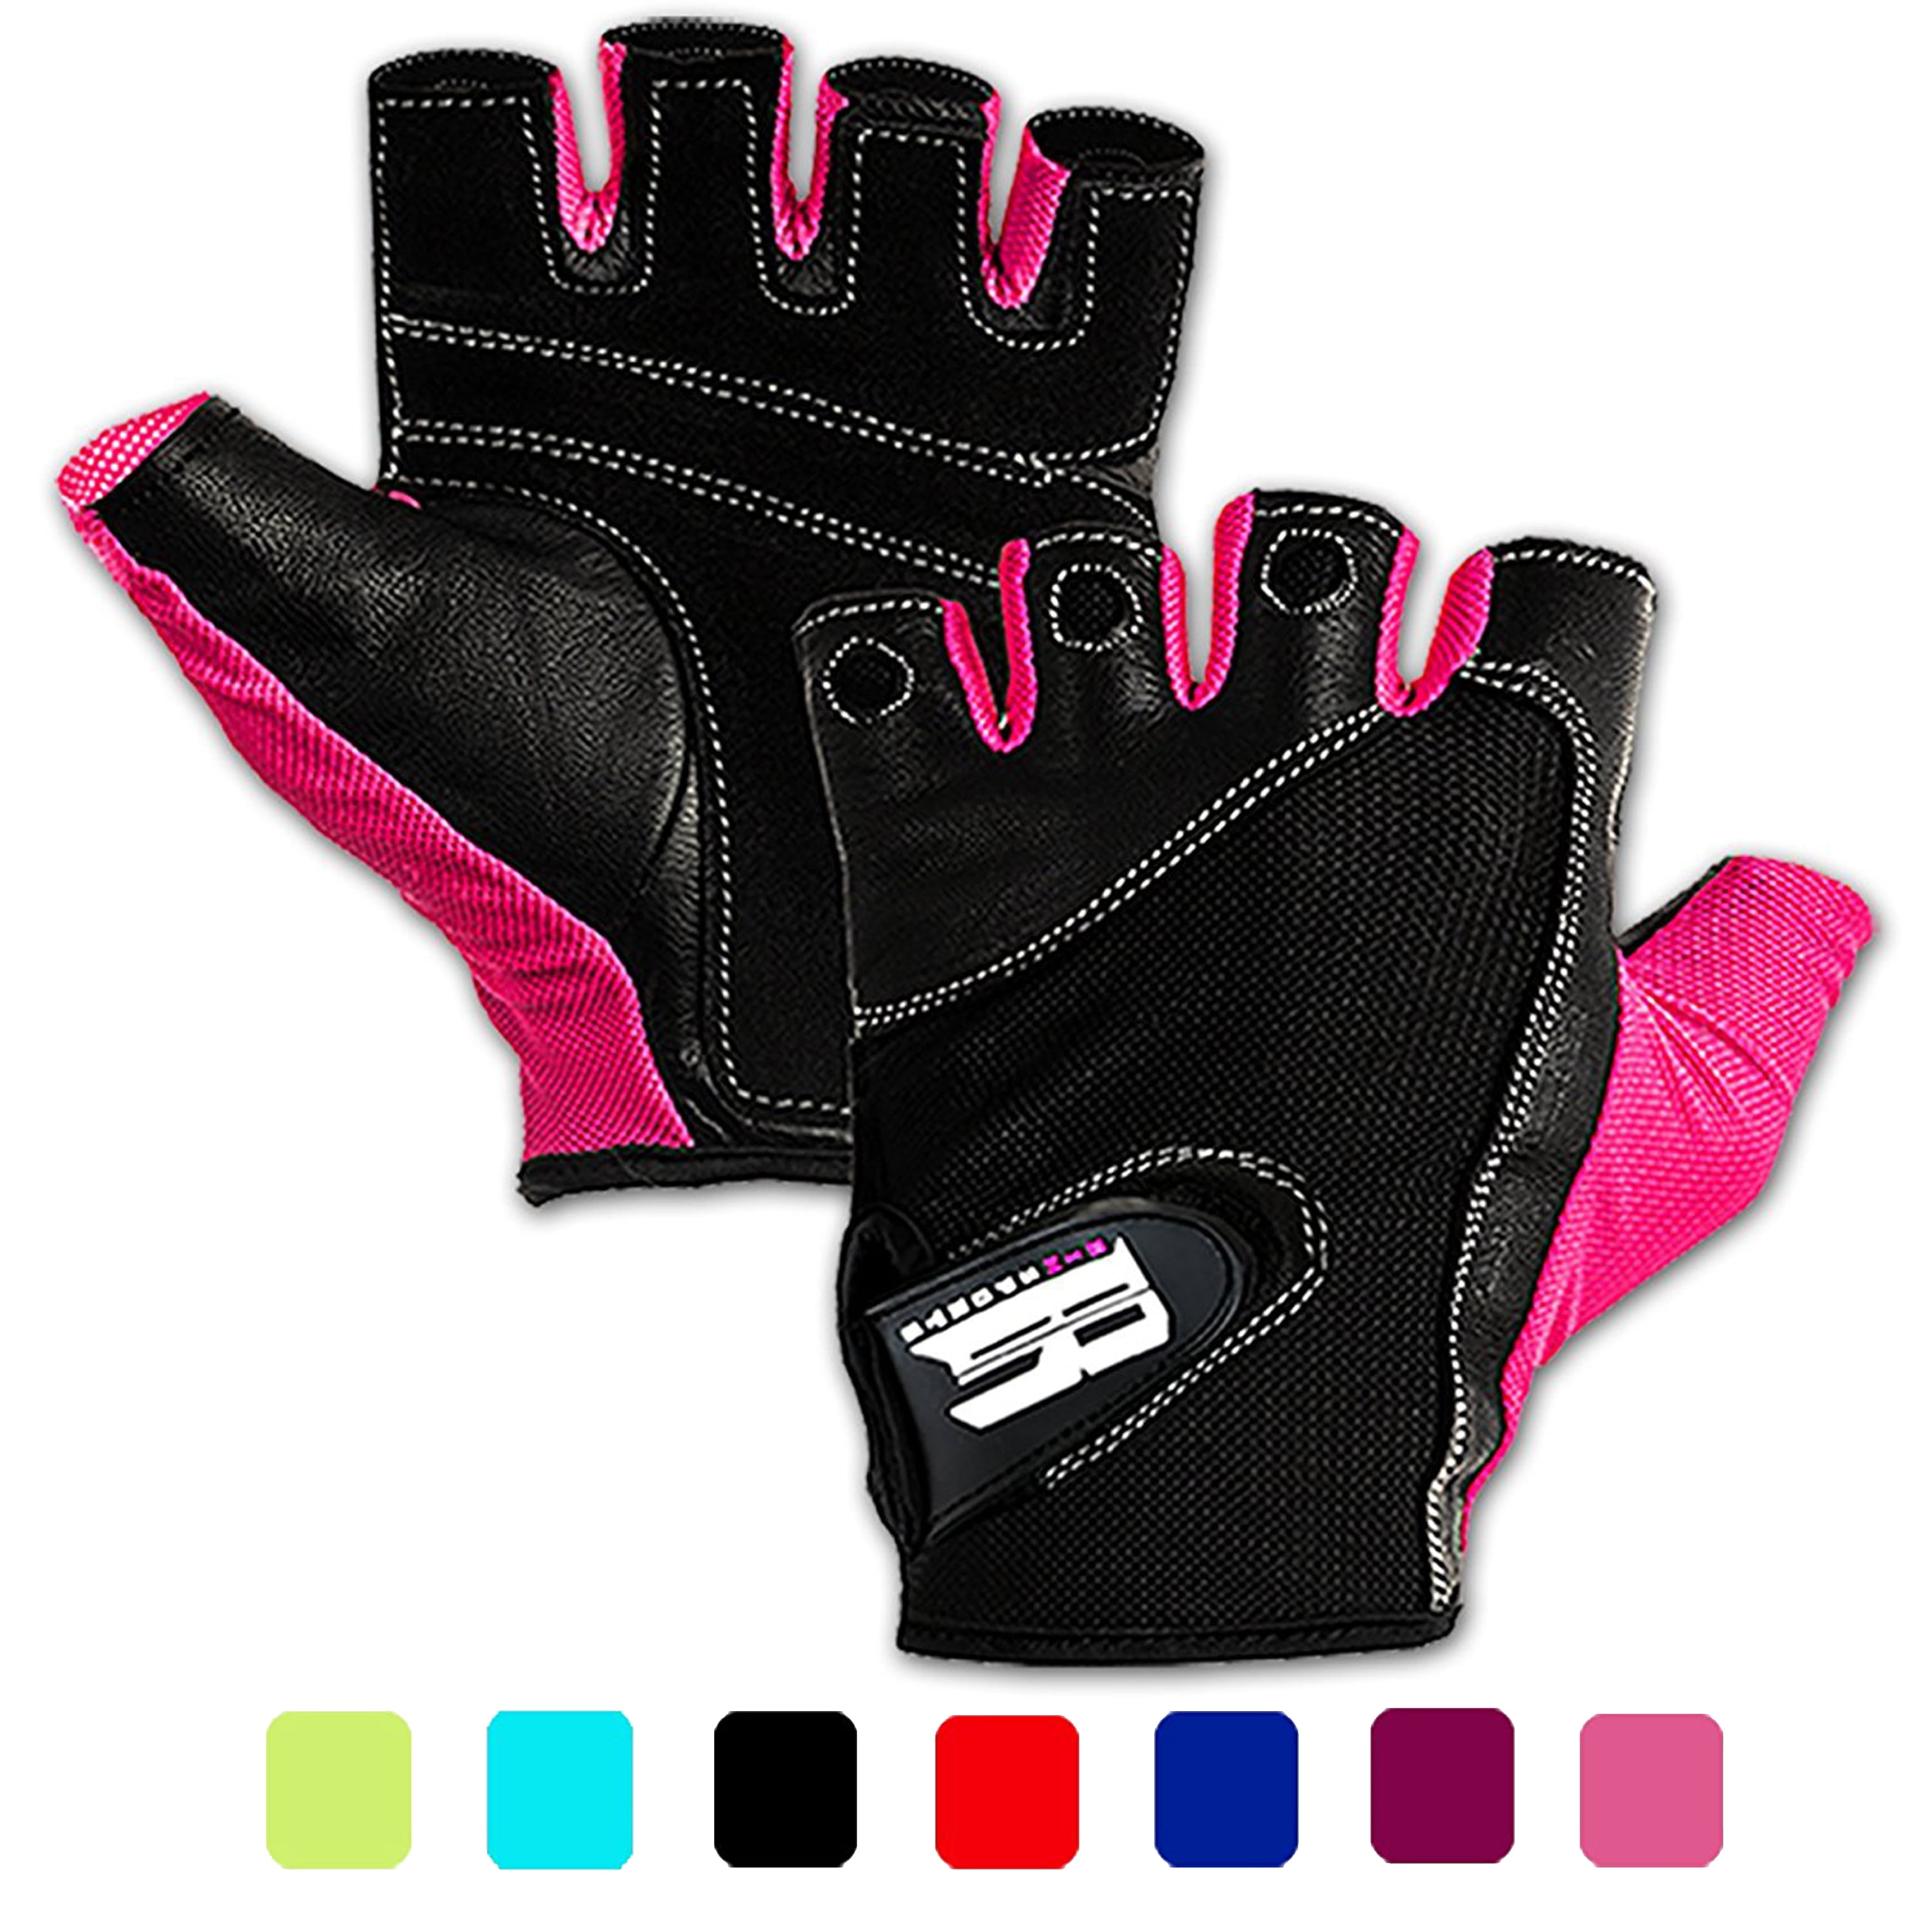 MESH LEATHER WEIGHT LIFTING PADDED GLOVES FITNESS TRAINING CYCLING GYM SPORTS 